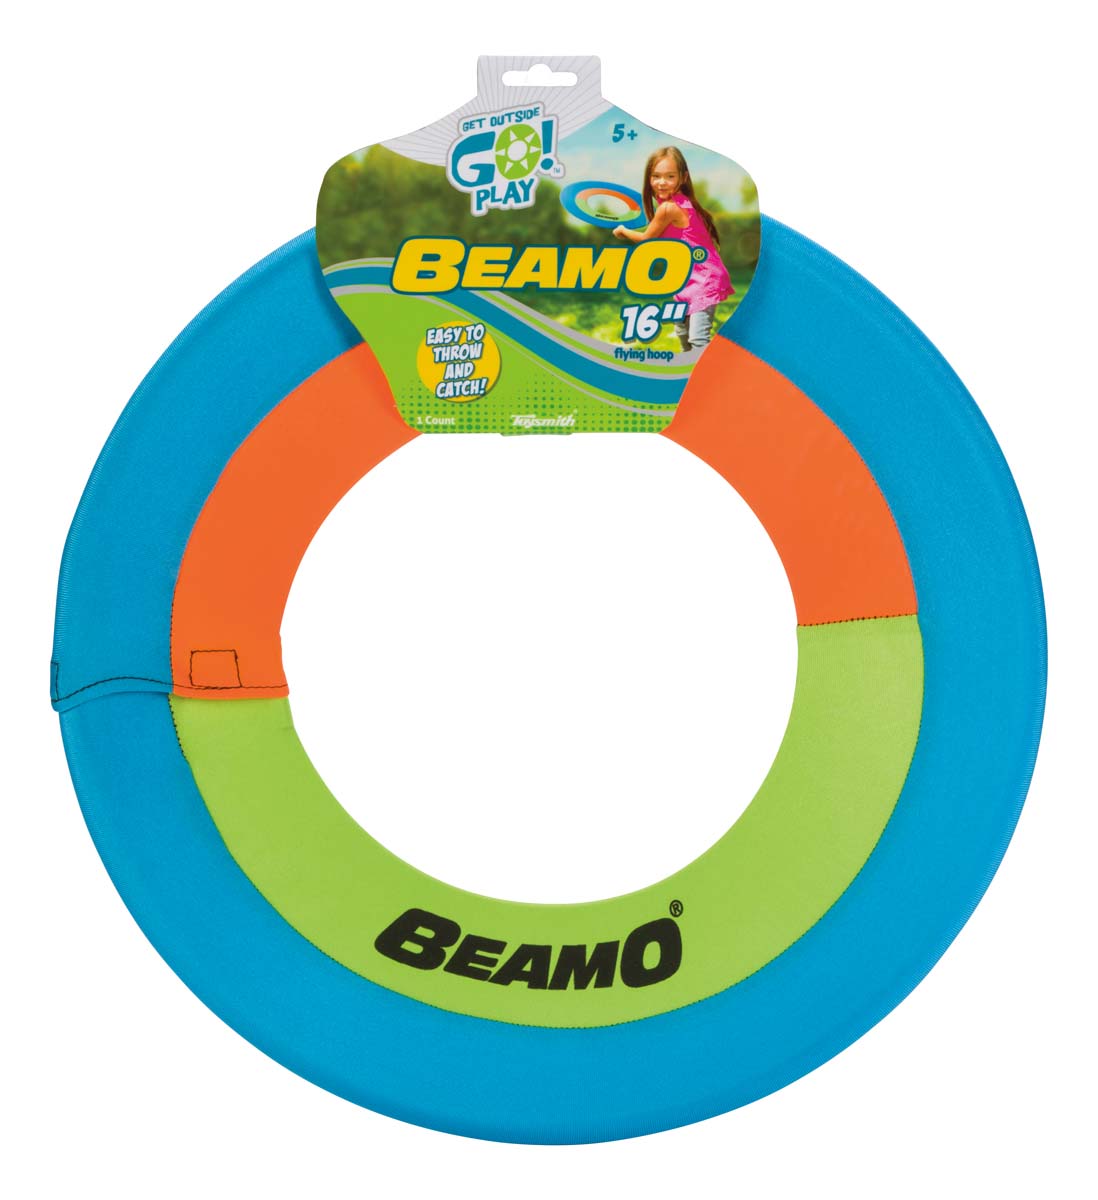 Beamo 16" disk with tag. Text of tag states that the disk is easy to throw and catch! For ages 5 plus